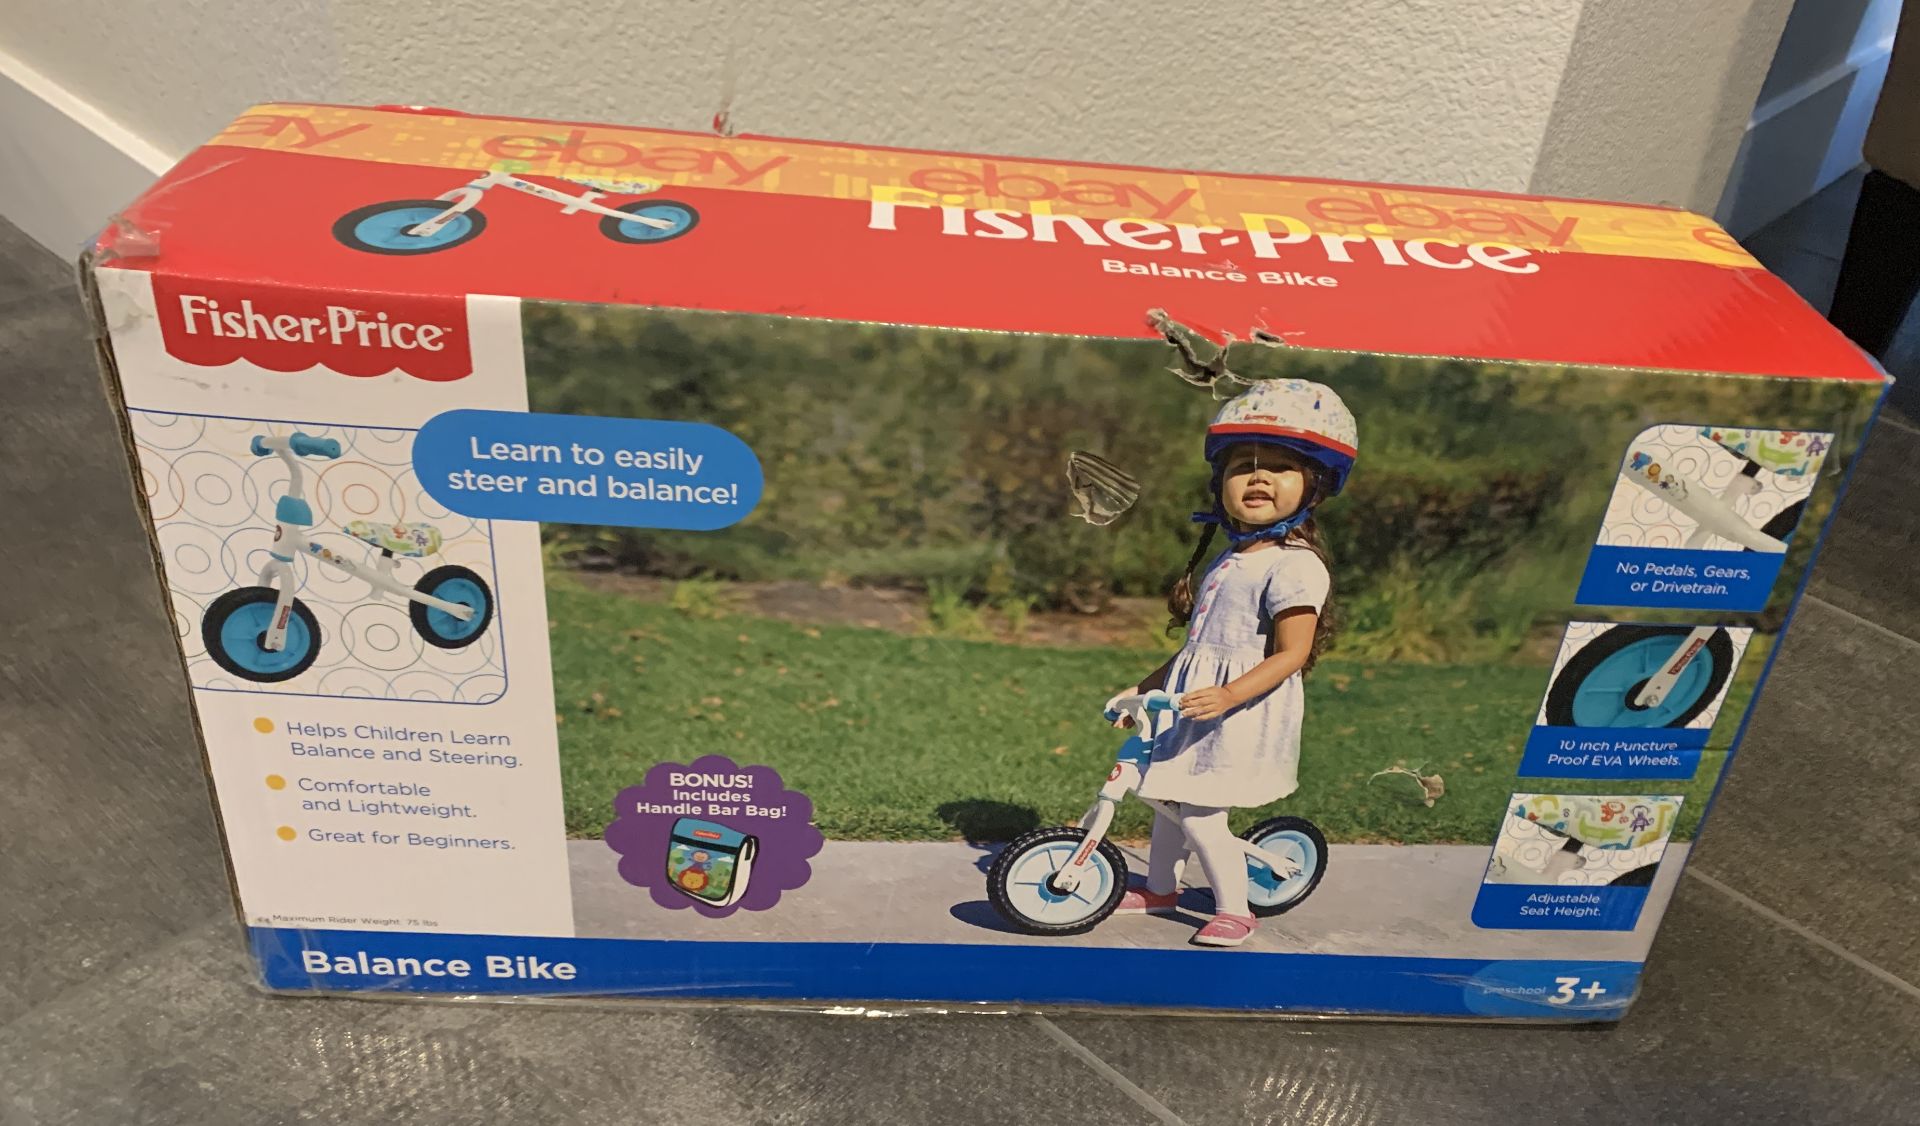 Fisher Price Balance Bike 3+ Years Old - 10" White And Blue New In Box - Image 2 of 2